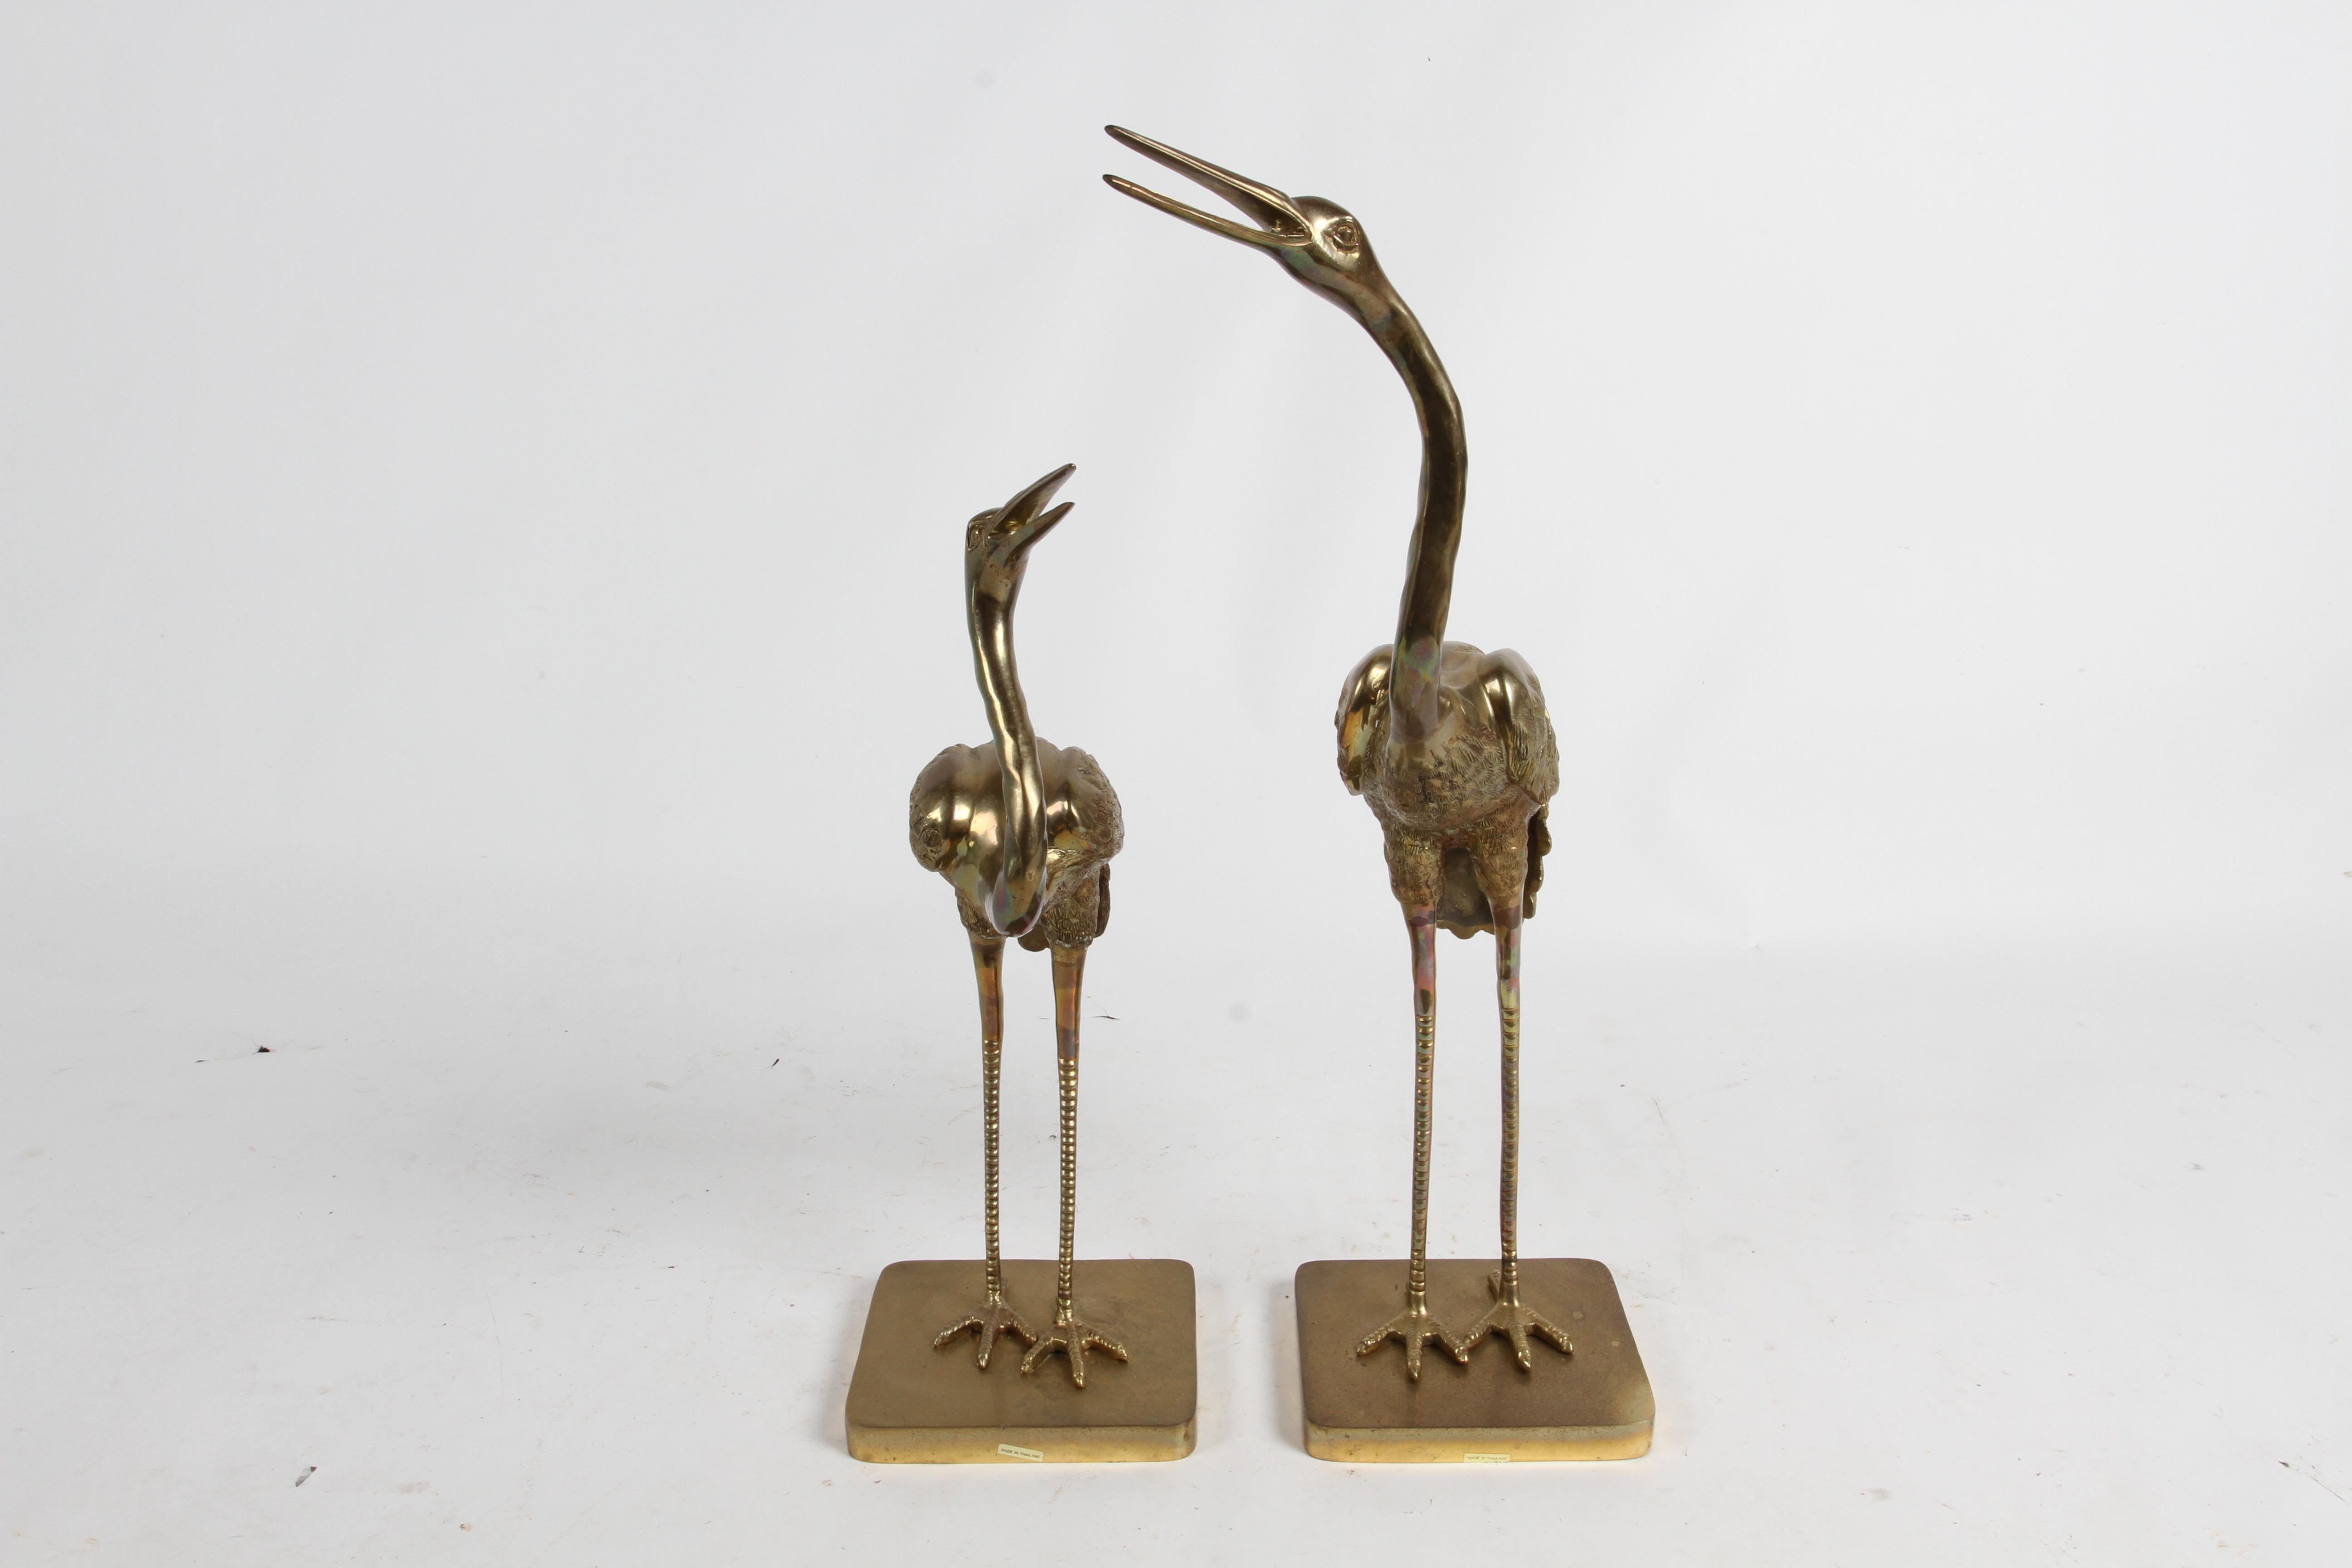 Pair of Hollywood Regency Circa 1970s Large Brass Cranes or Herons Sculptures For Sale 7